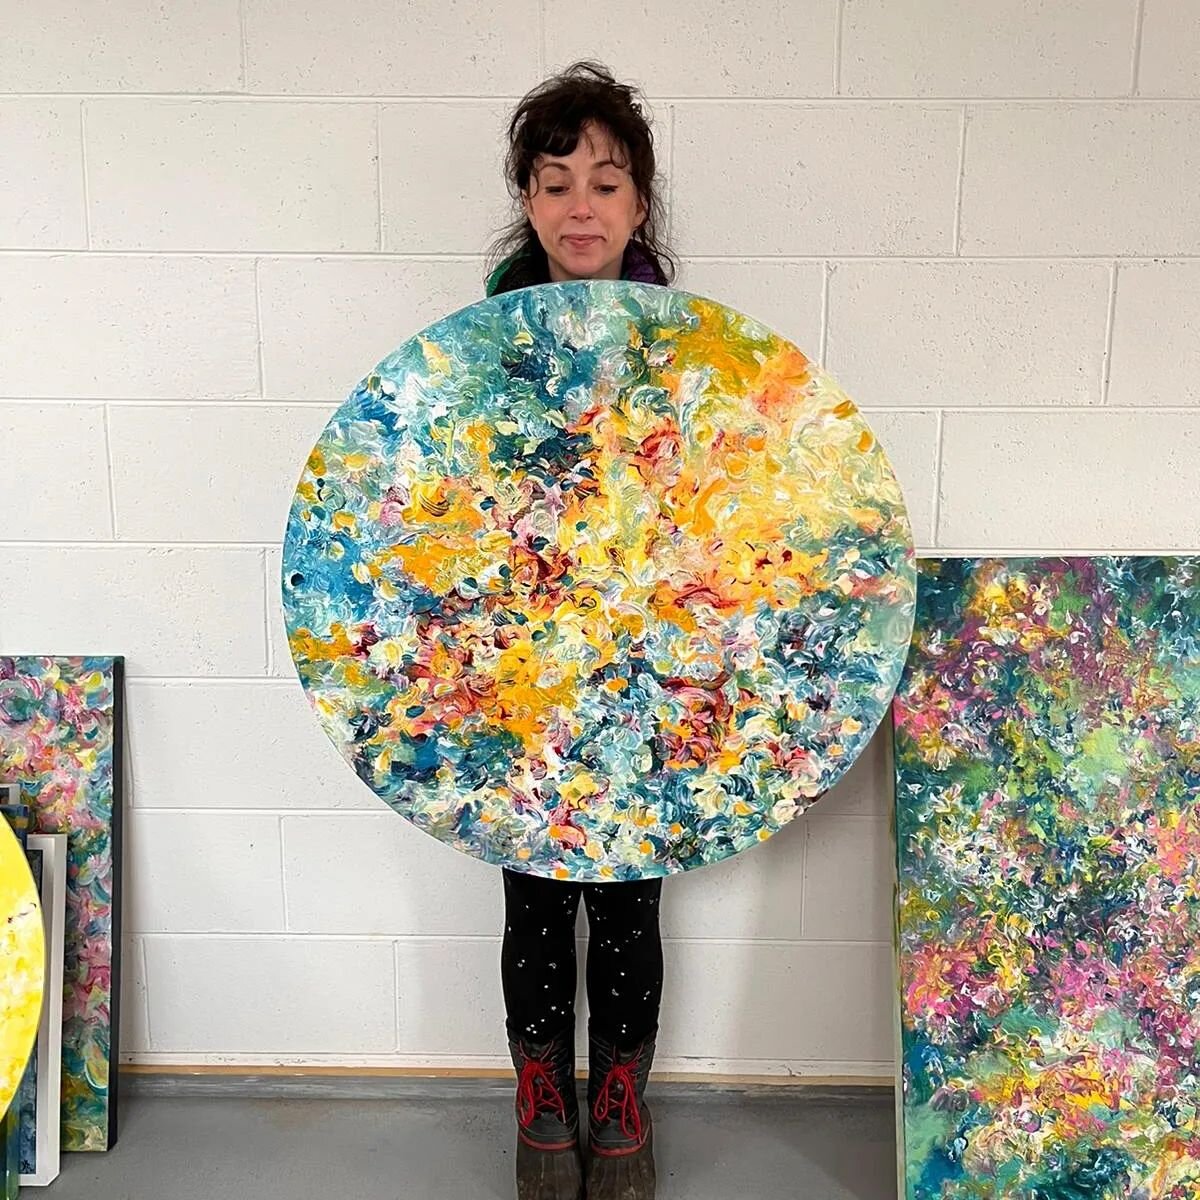 Hanging with 'An Croi Solas' in the new Spacio. 💛
This painting is still available - it is 80cm diameter and at an absolute bargain of &euro;300.00. Circular canvas is custom made my @thefolkswholiveonthehill Available now through my website- link i